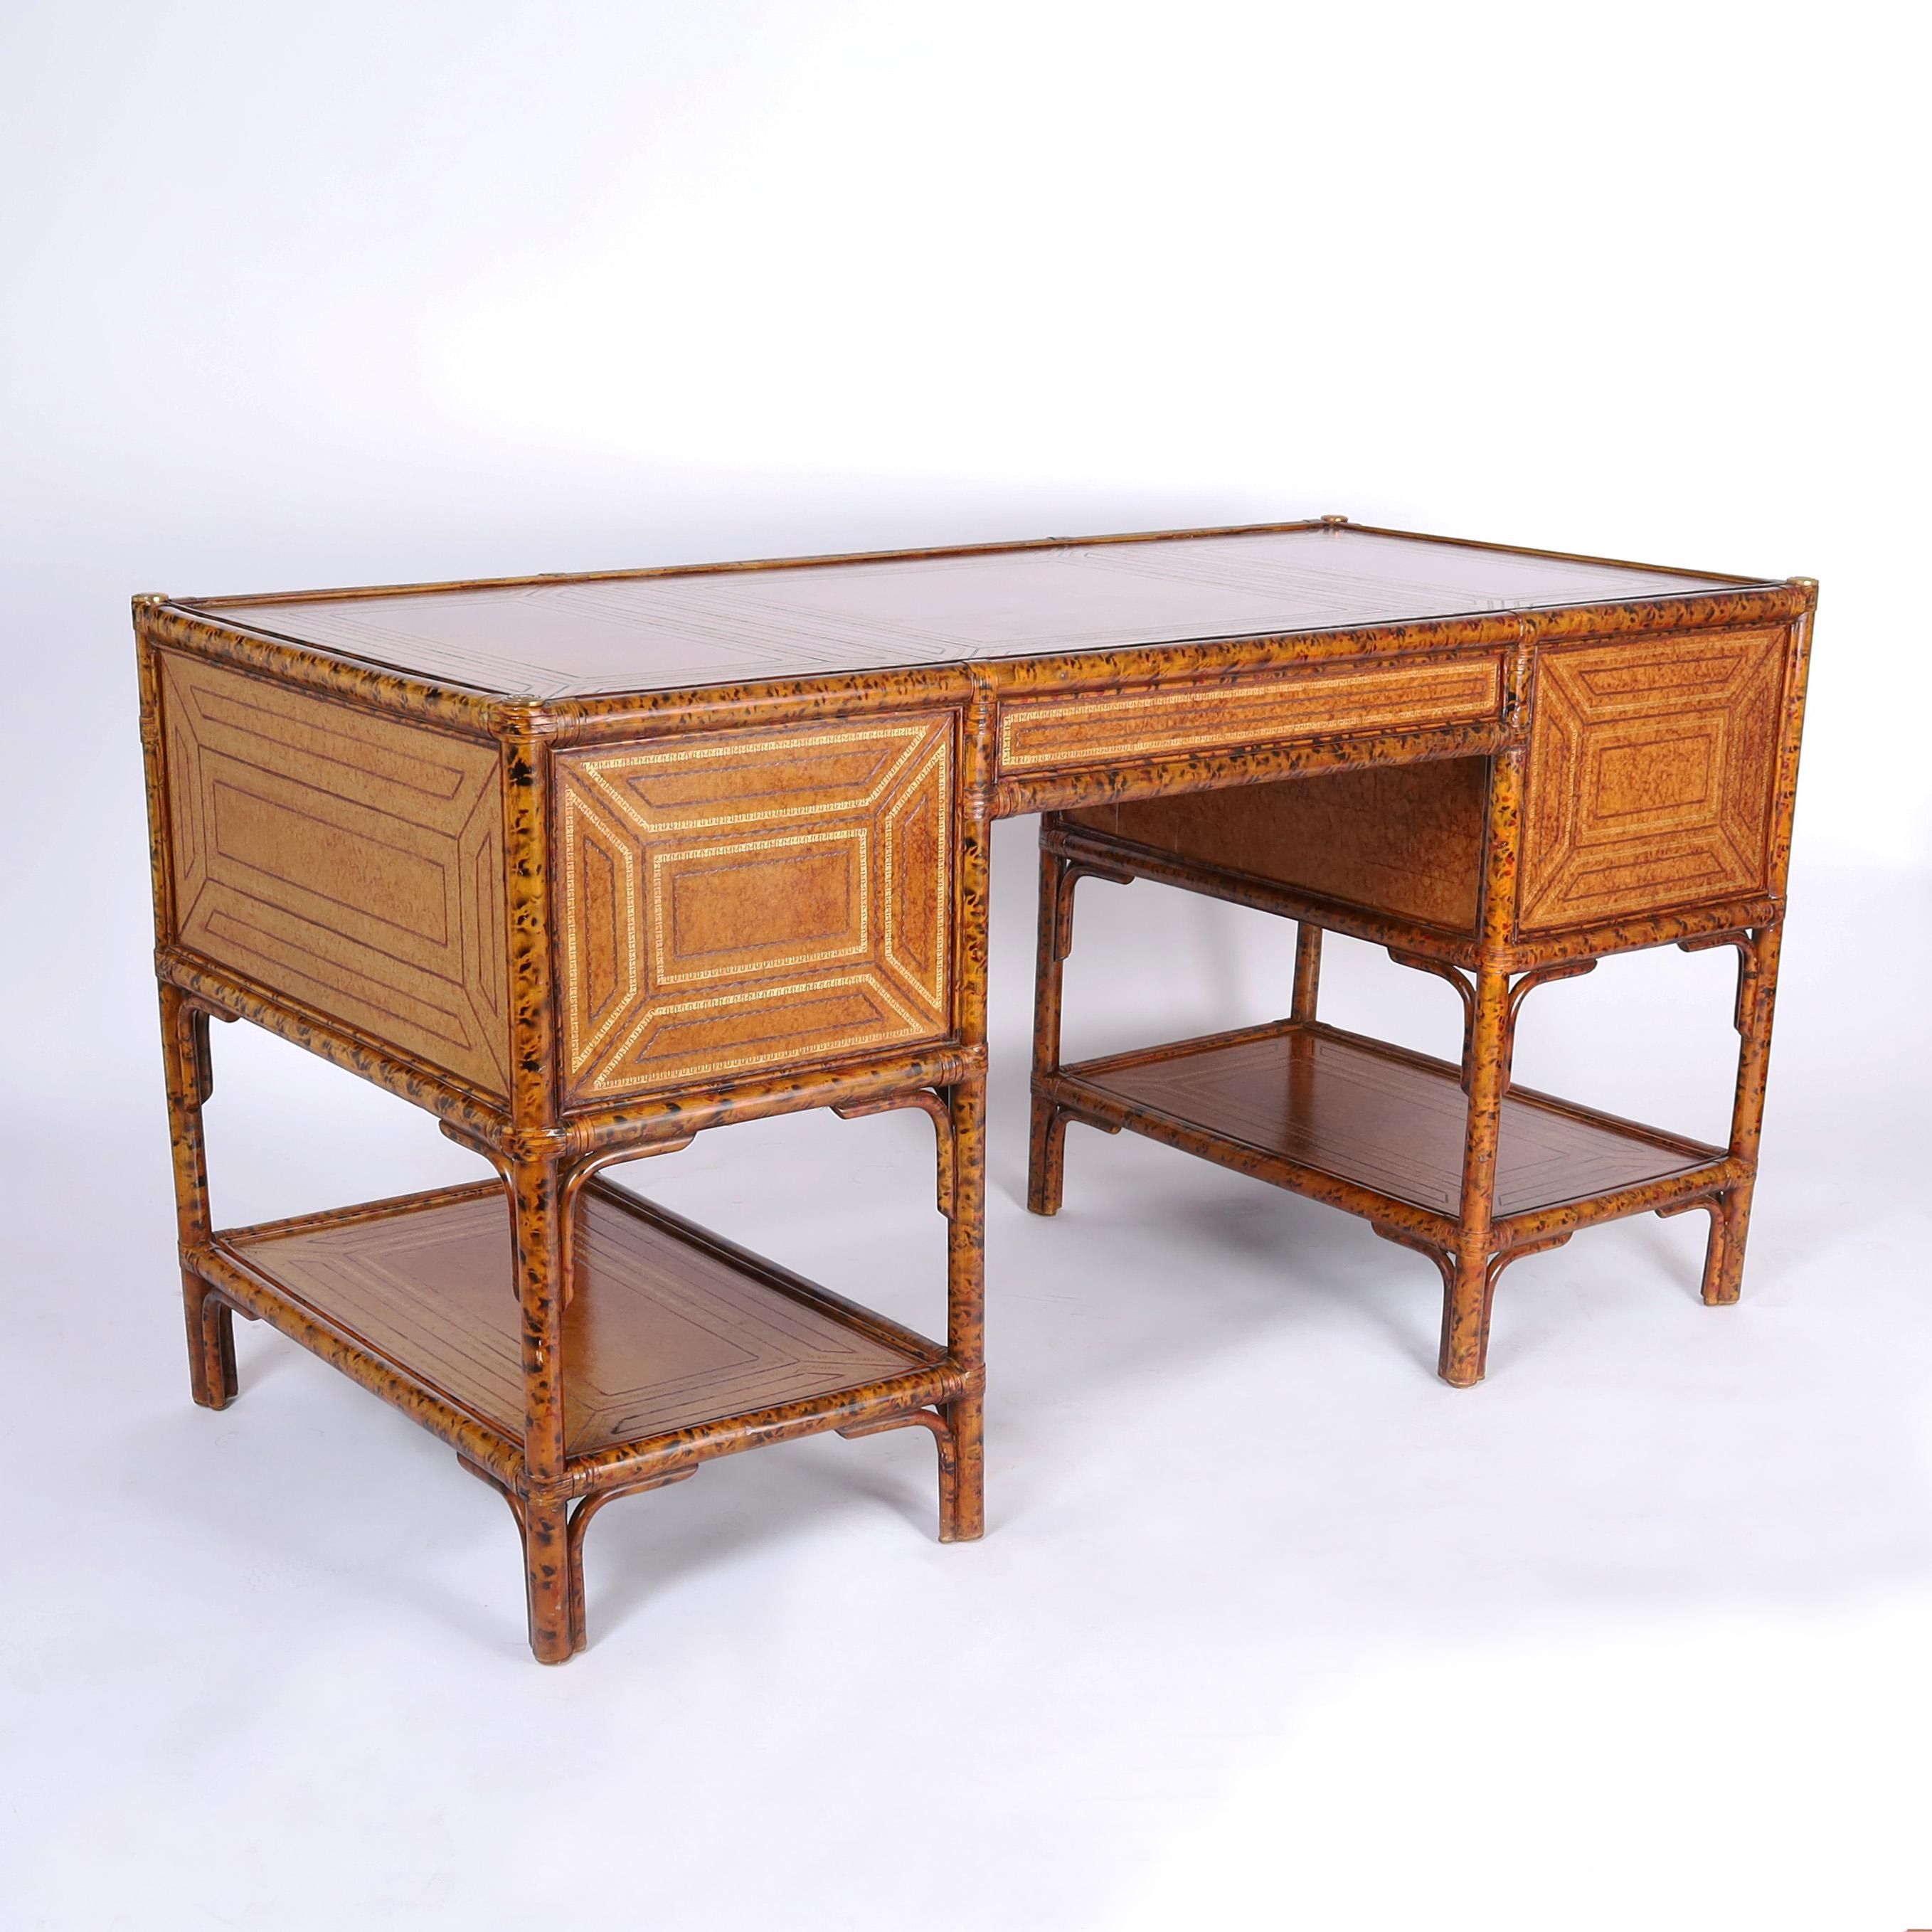 British Colonial Style Faux Bamboo Leather Clad Desk by Maitland-Smith In Good Condition For Sale In Palm Beach, FL